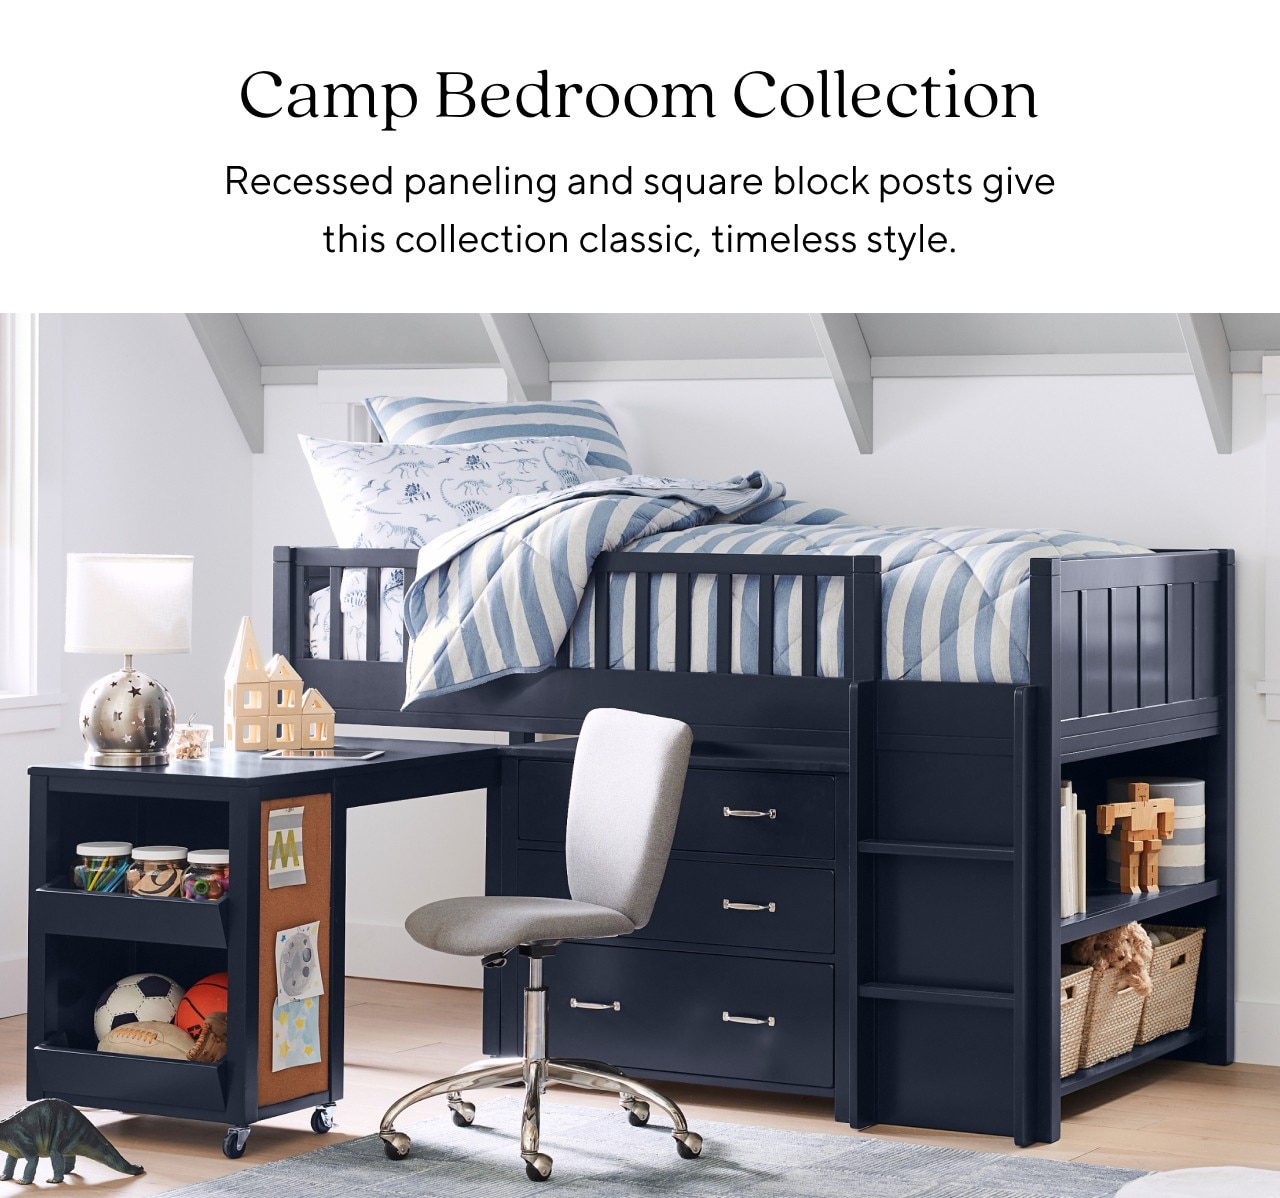 CAMP BEDROOM COLLECTION